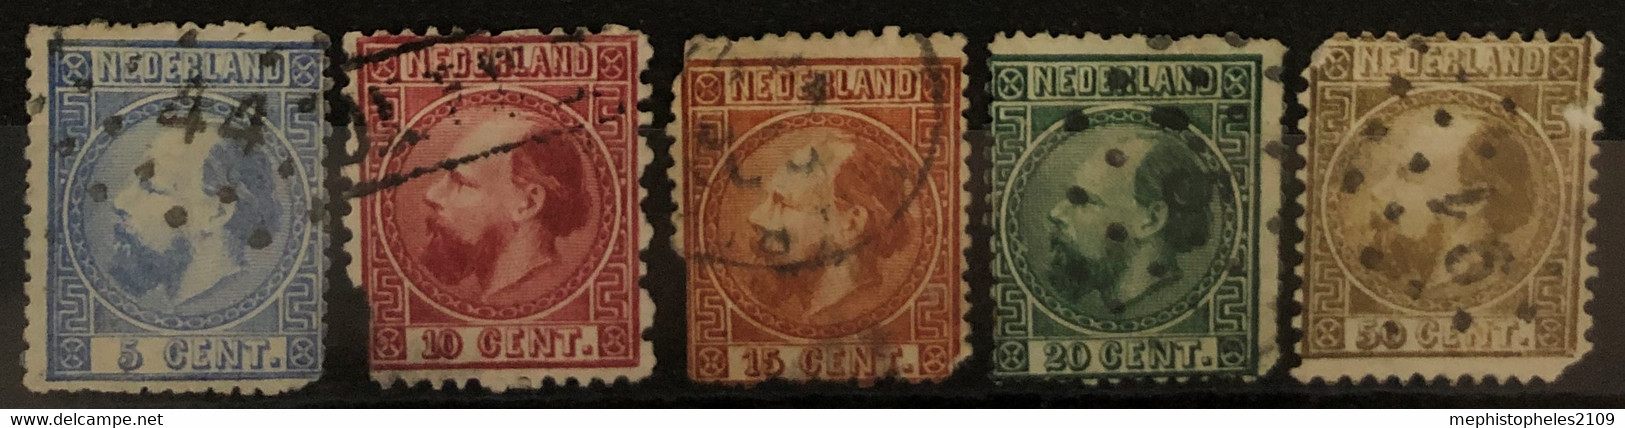 NETHERLANDS 1867 - Canceled - Sc# 7, 8, 9, 10, 11, 12 - 2nd Choix - Used Stamps